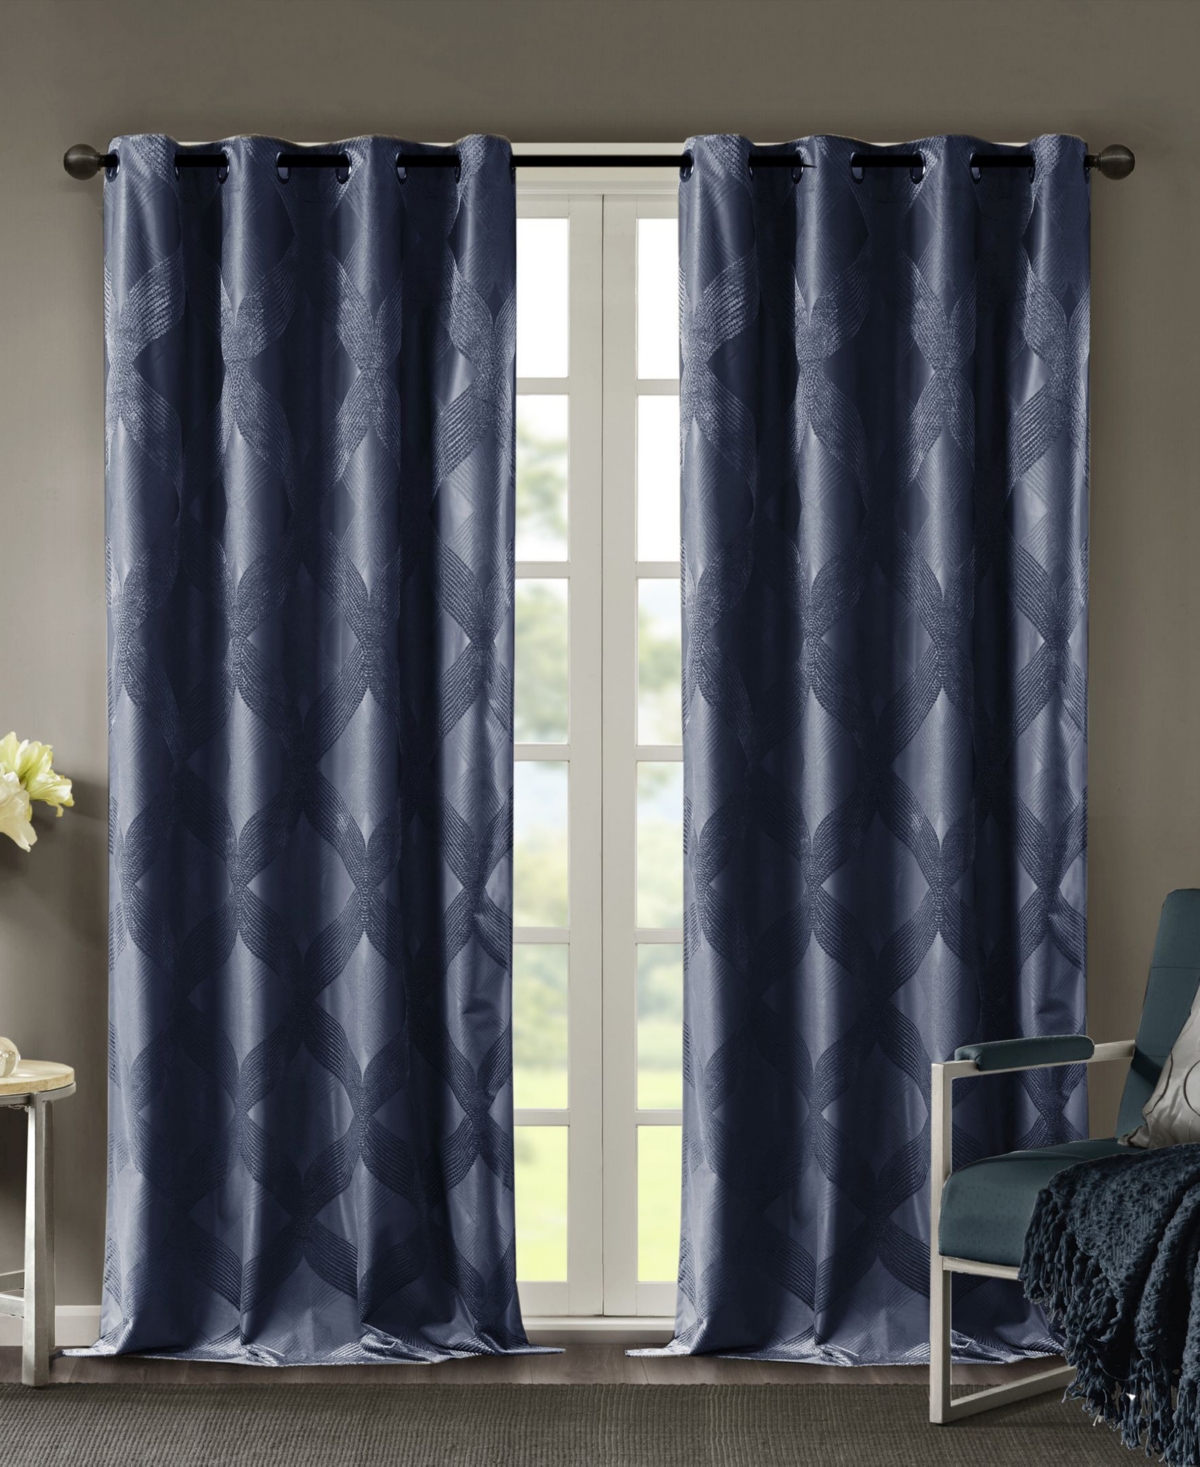 Bentley Ogee Knitted Jacquard Total Blackout Curtain Panel, 50"W x 95"L - Charcoal